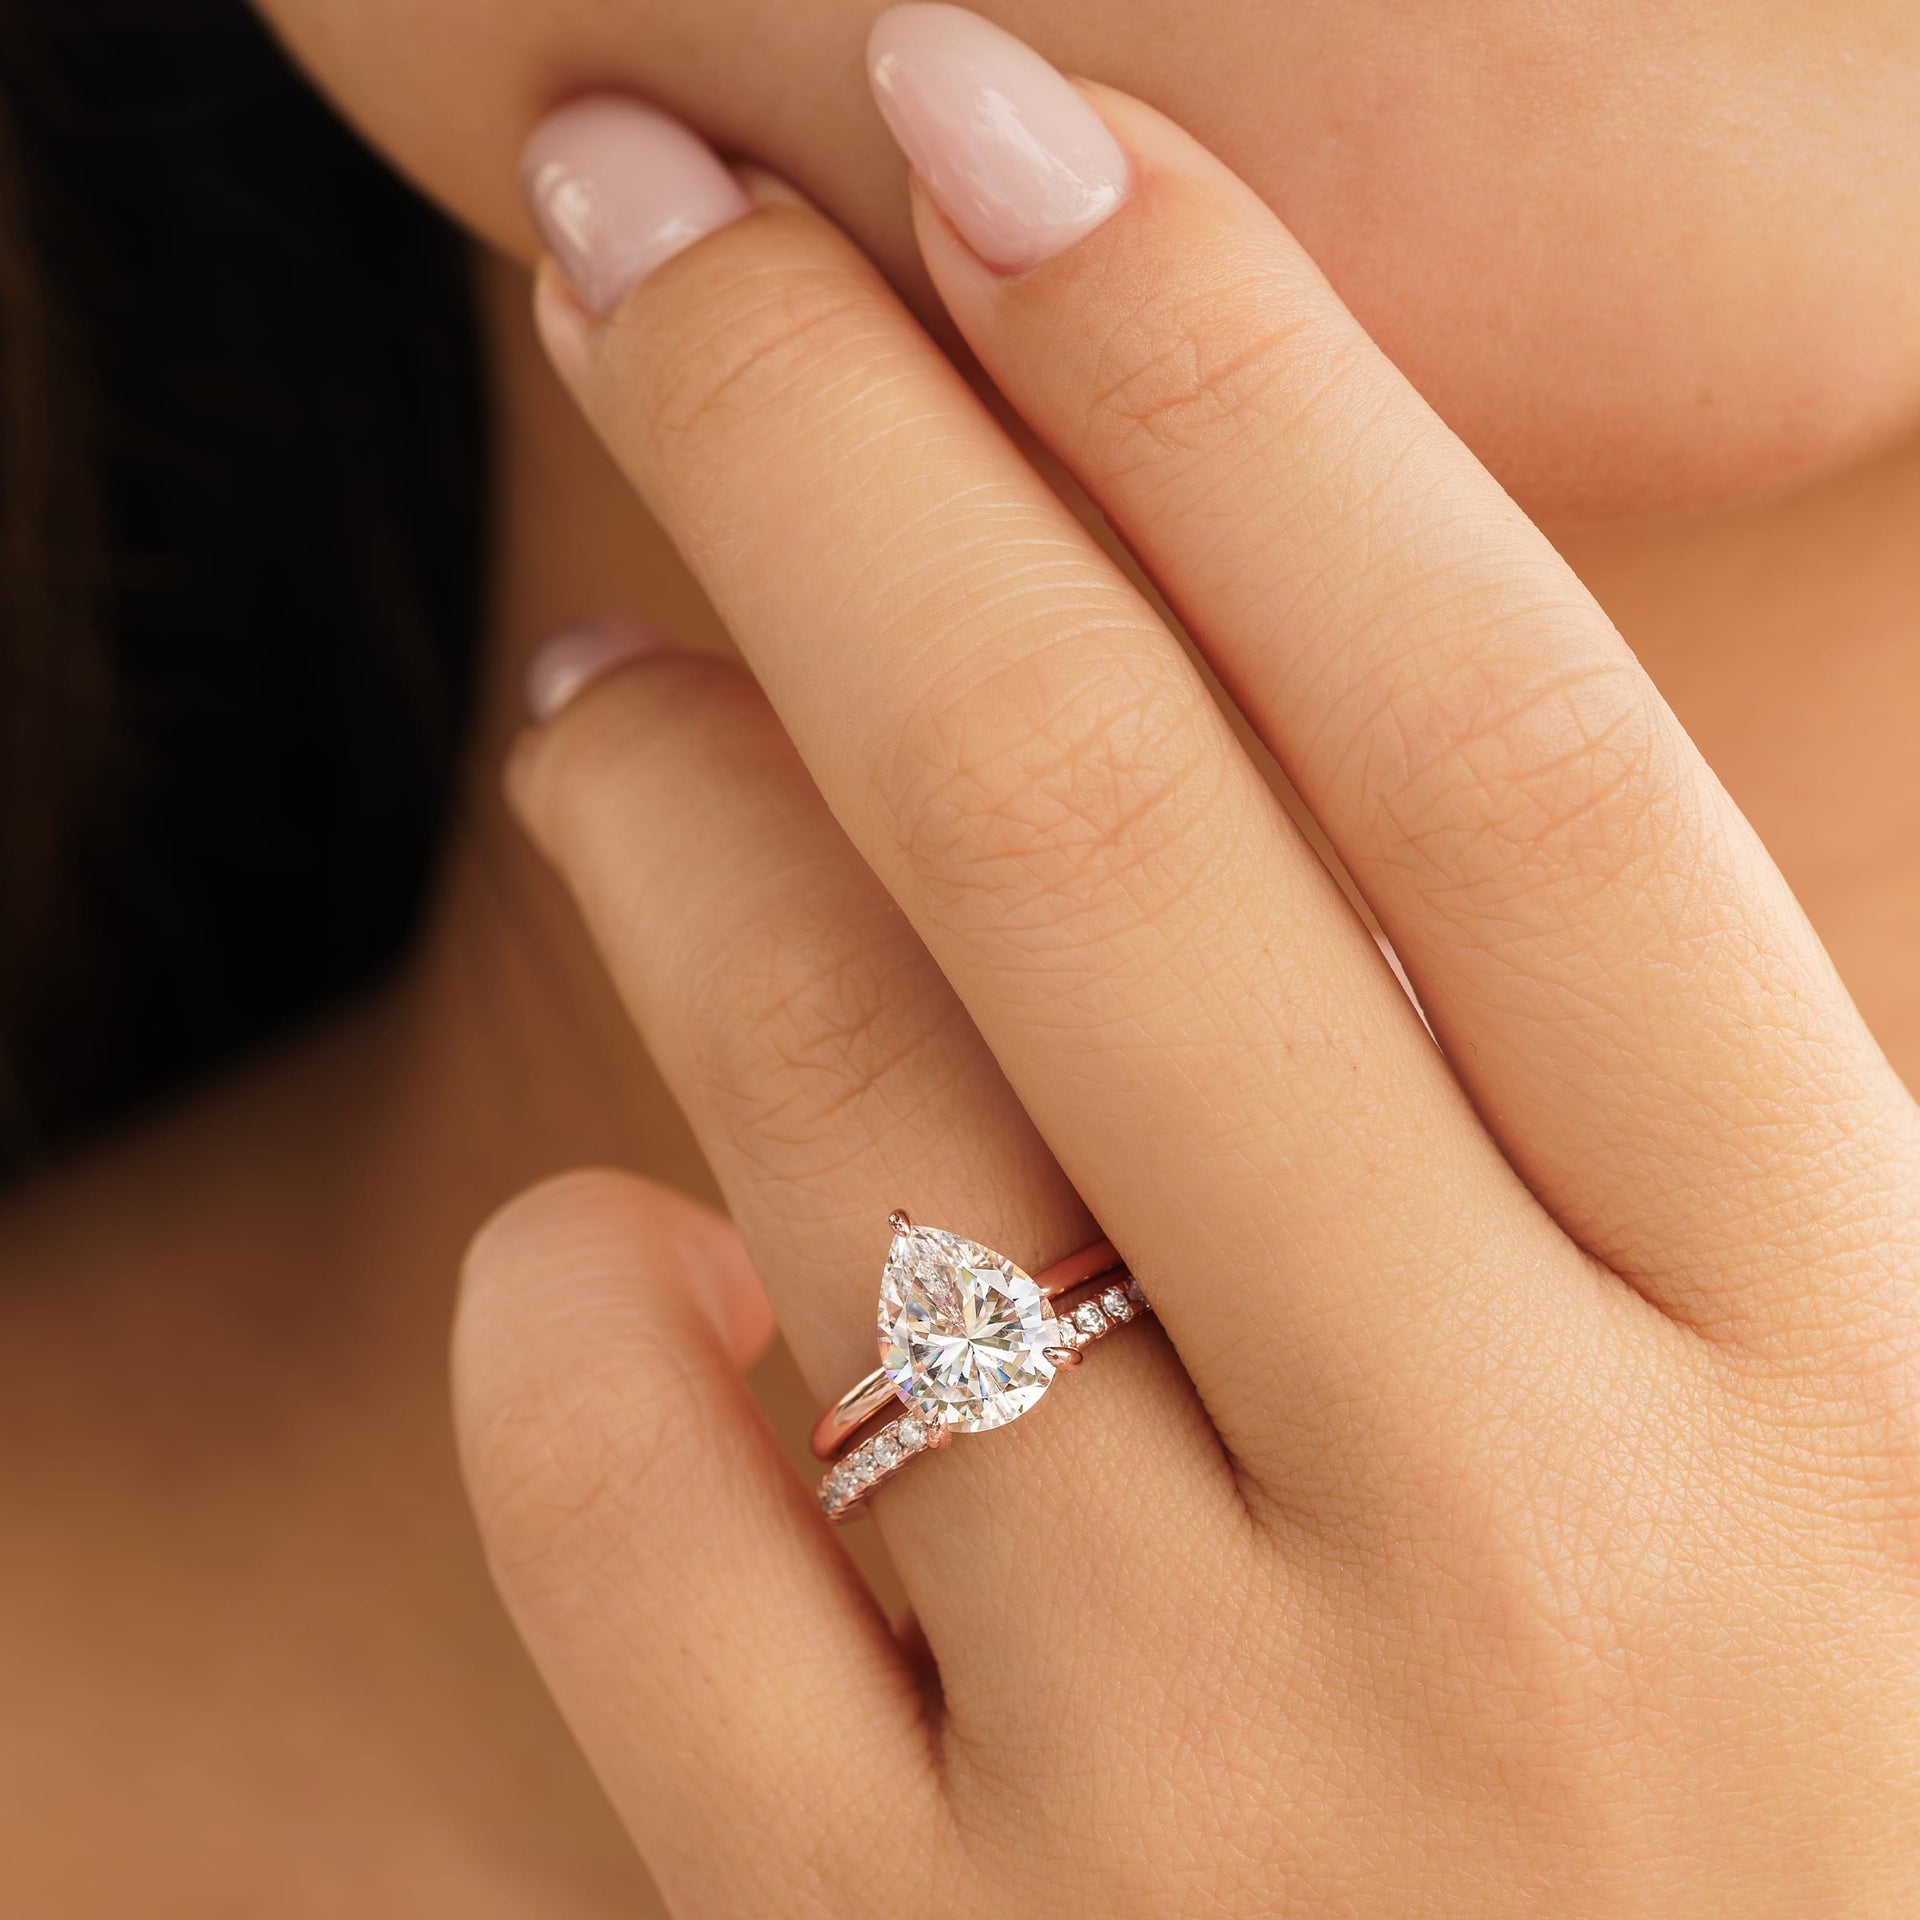 rose gold pear shaped engagement ring on woman's hand